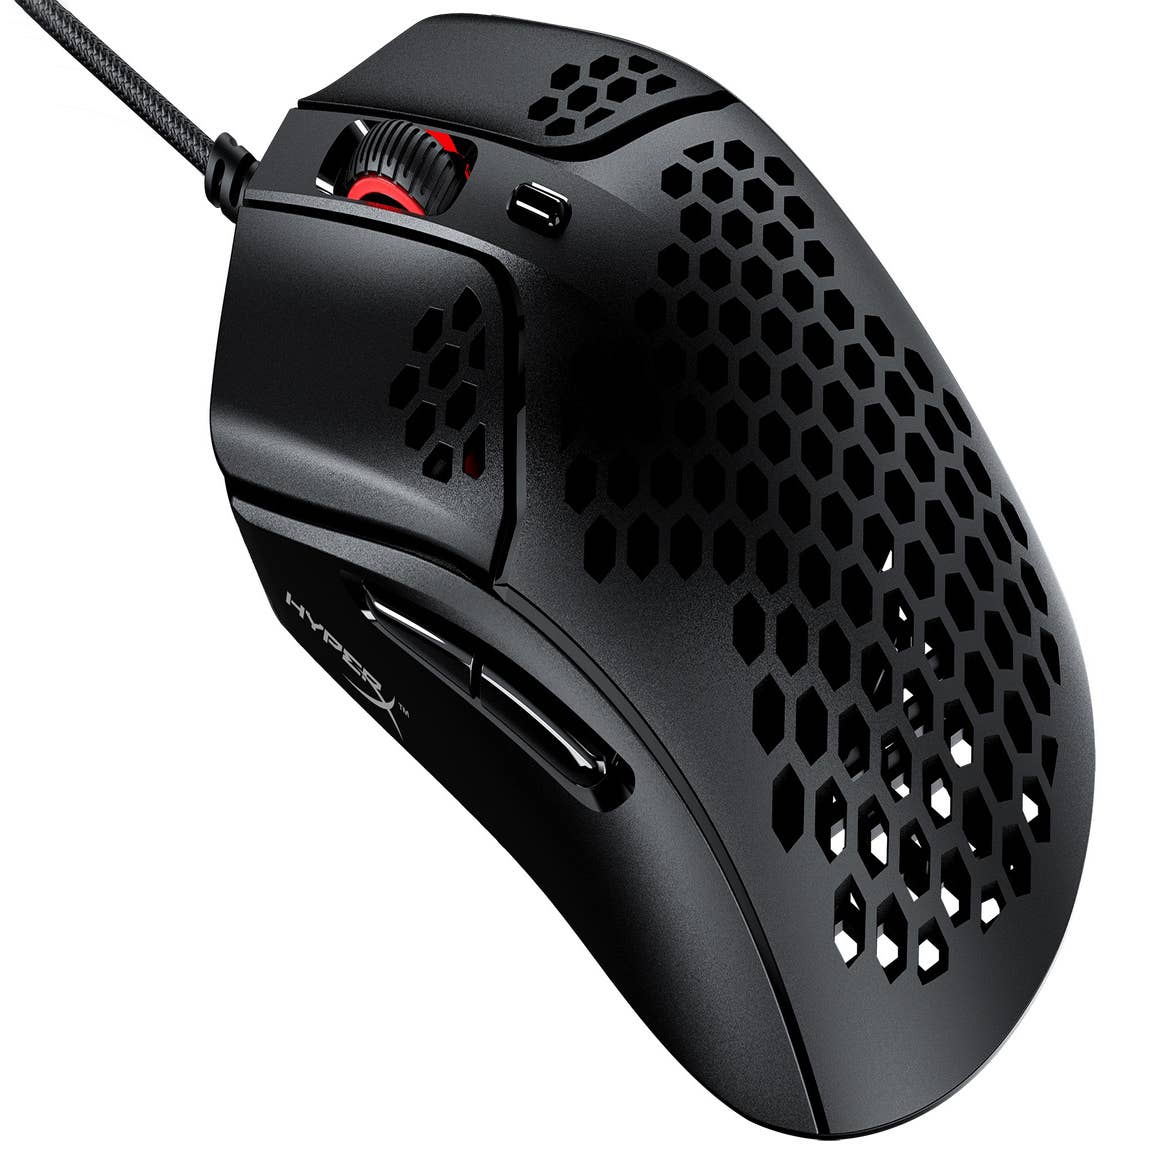 Prime Wireless, Lightweight Ultra-fast FPS Gaming Mouse